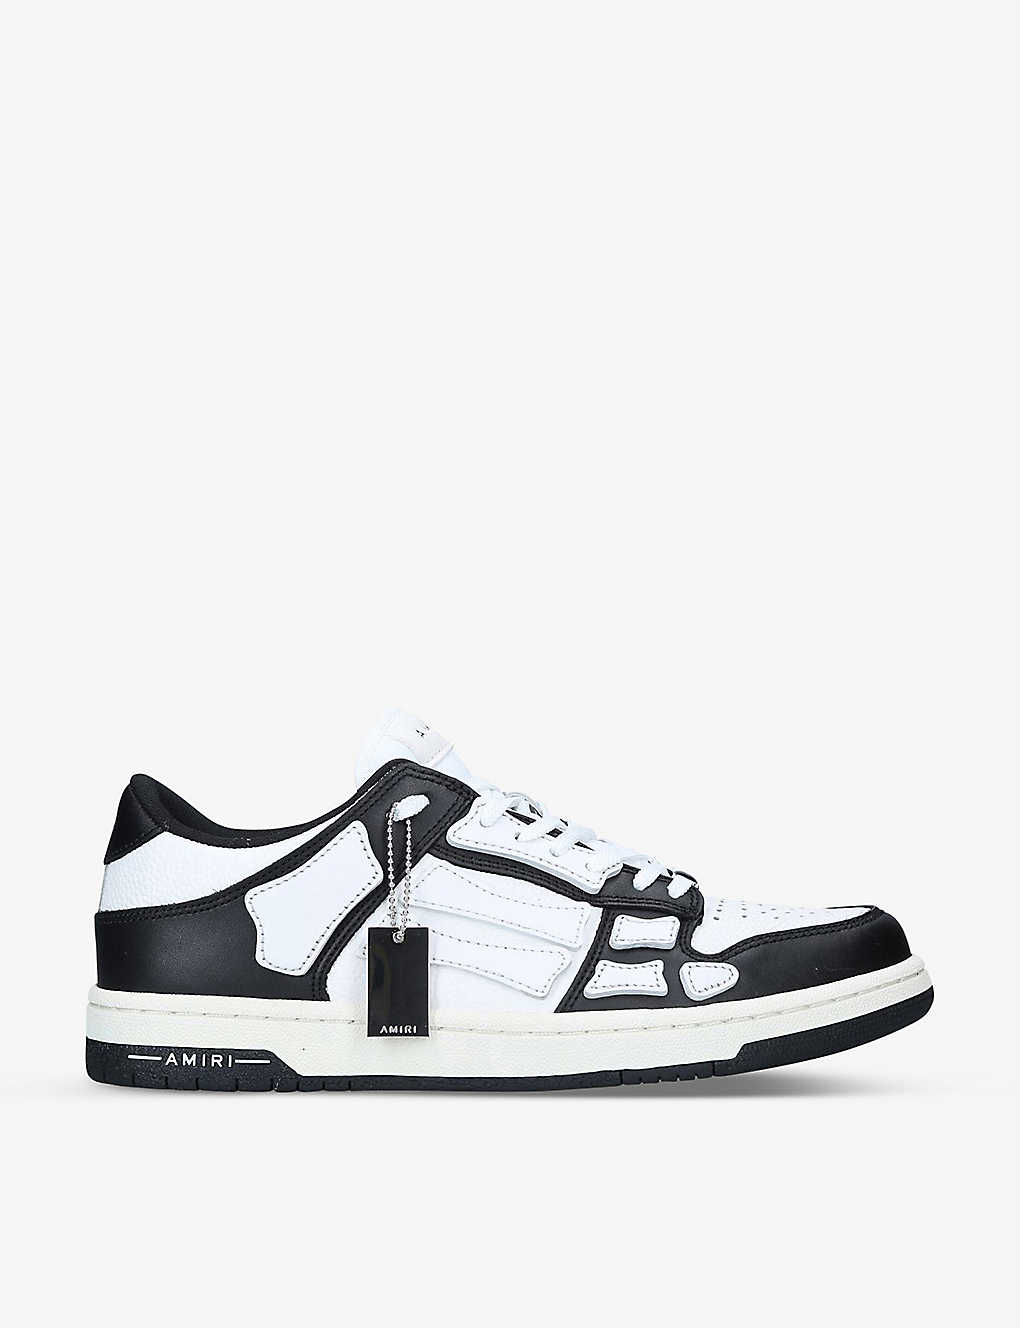 Shop Amiri Men's Blk/white Skel Panelled Leather Low-top Trainers